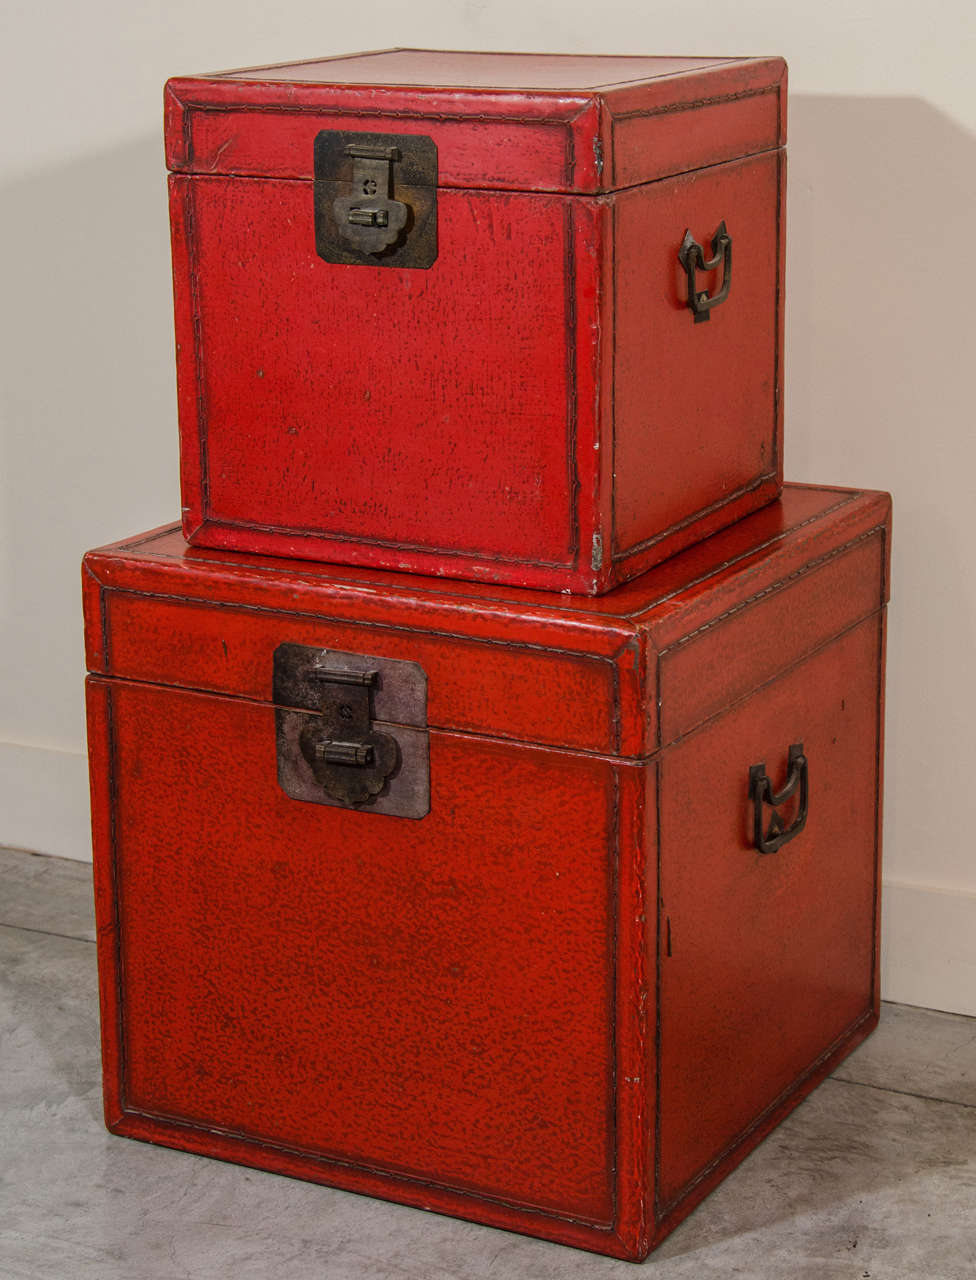 Two antique Chinese red leather boxes with identical, original hardware. From Shanxi province, c. 1900.  
Small Box is Sold. 
Larger Box:  L: 16 D: 16  H: 16 = $1,150
BX501